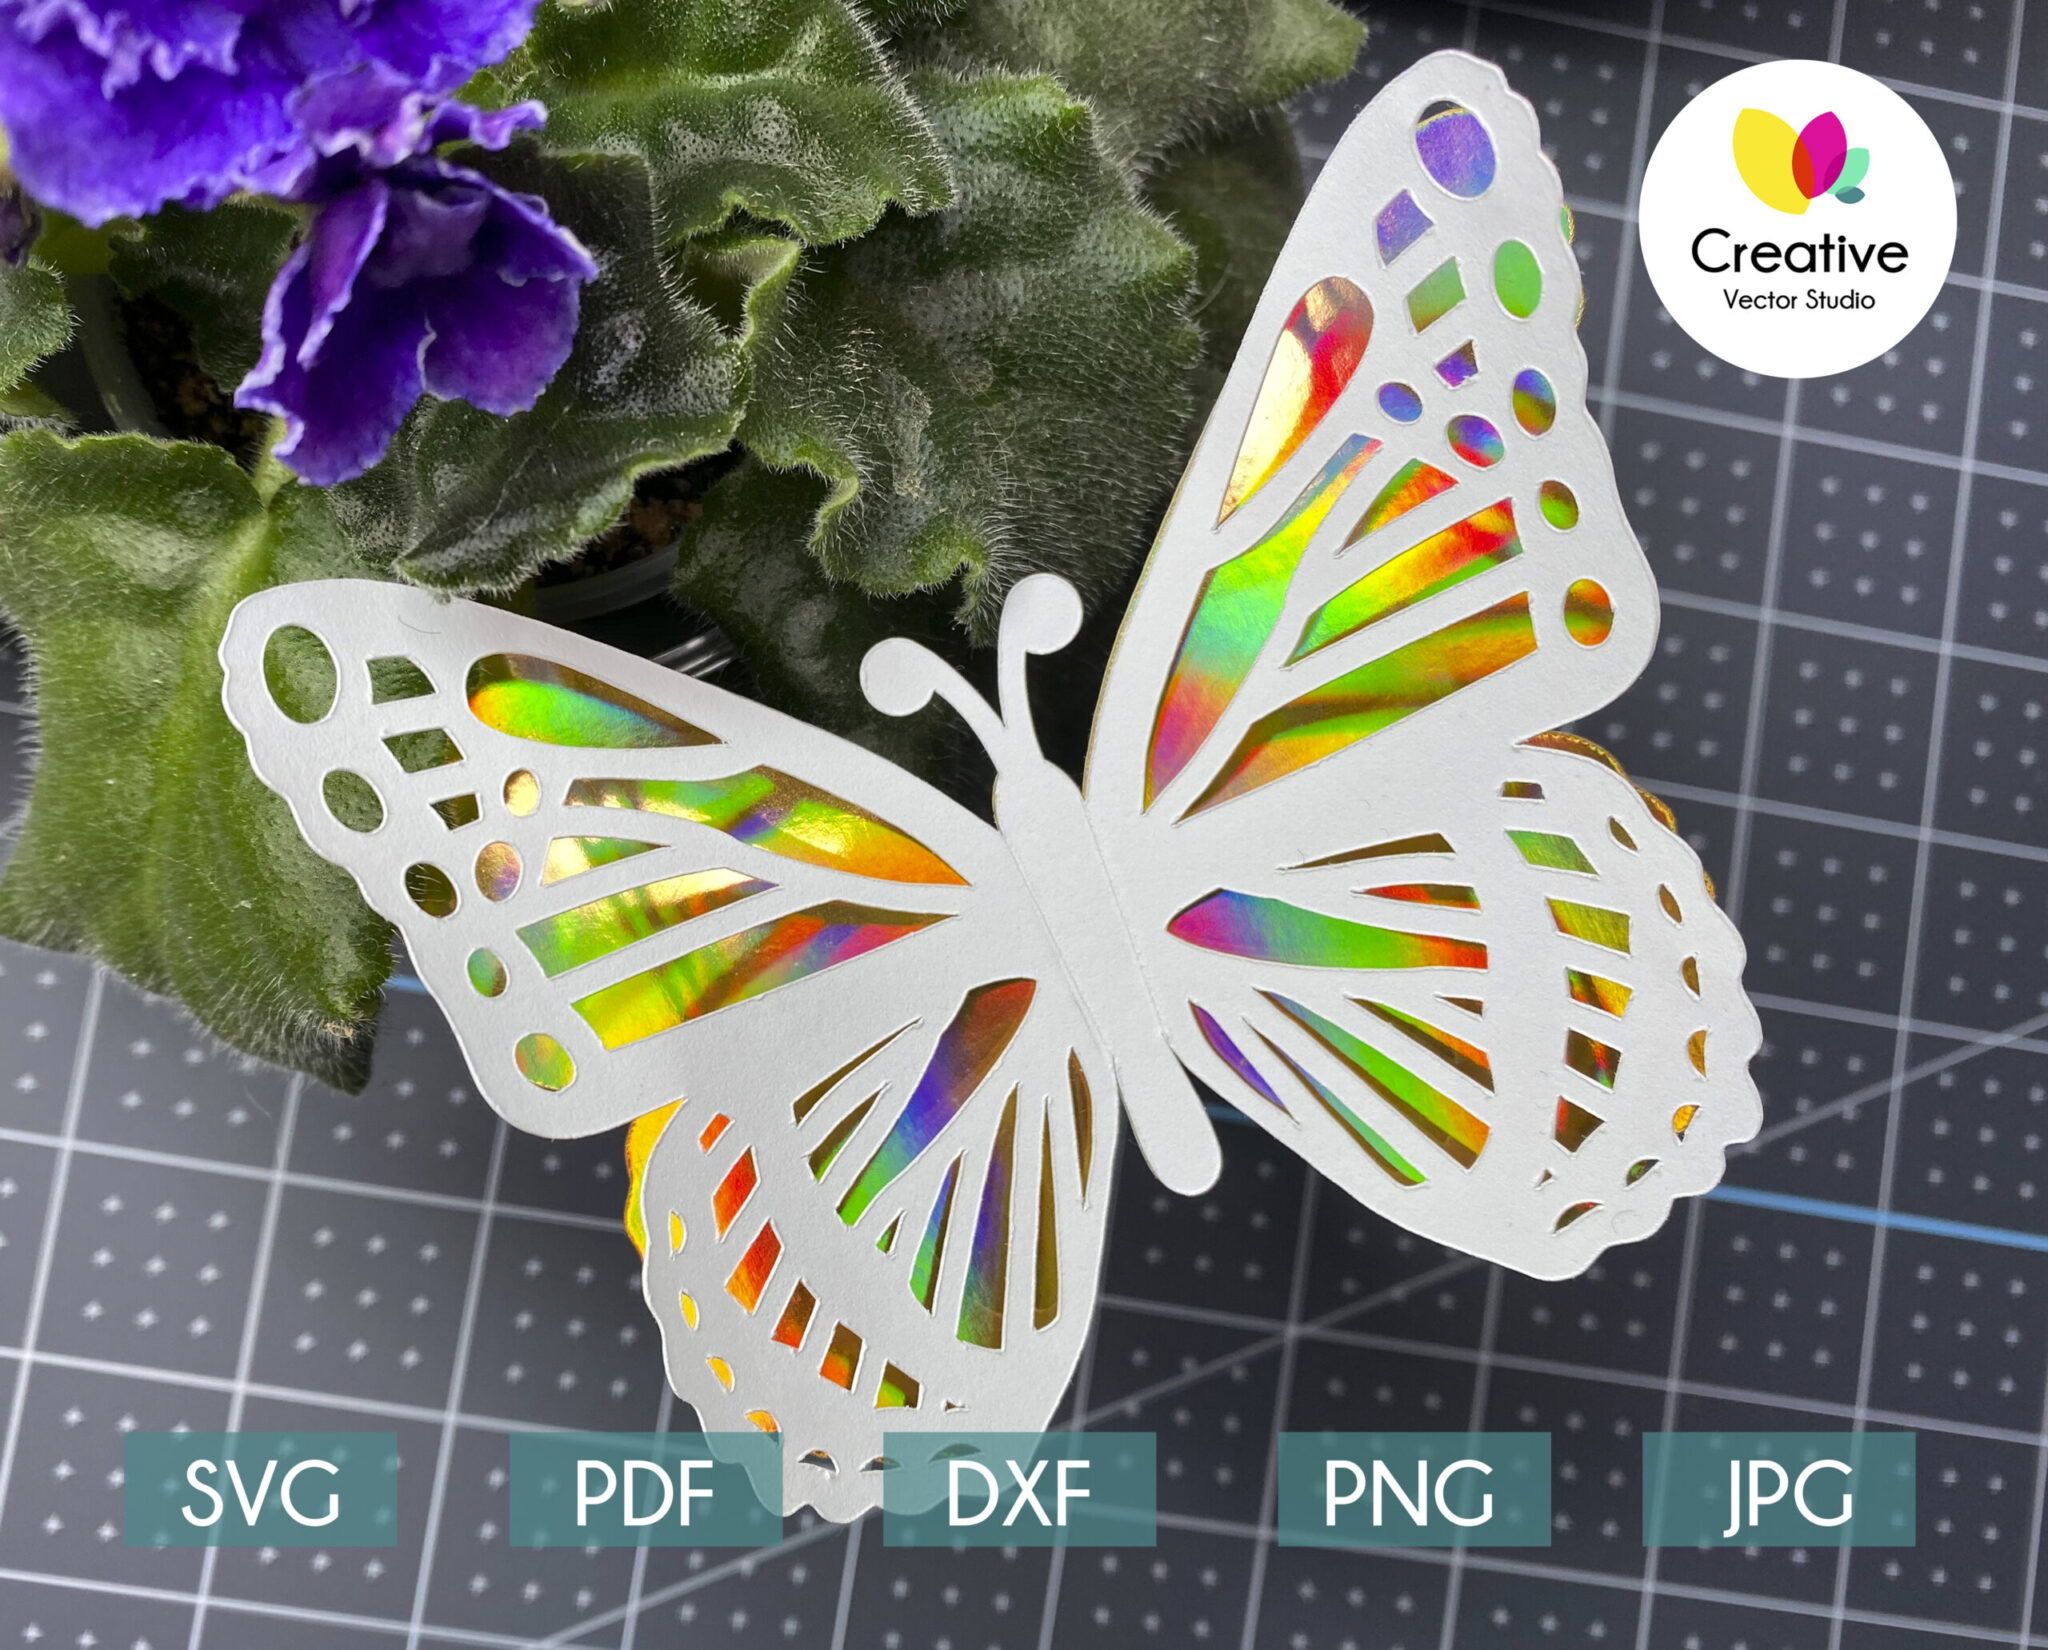 Download 3D Butterfly SVG #1 Cutting Template | Creative Vector Studio